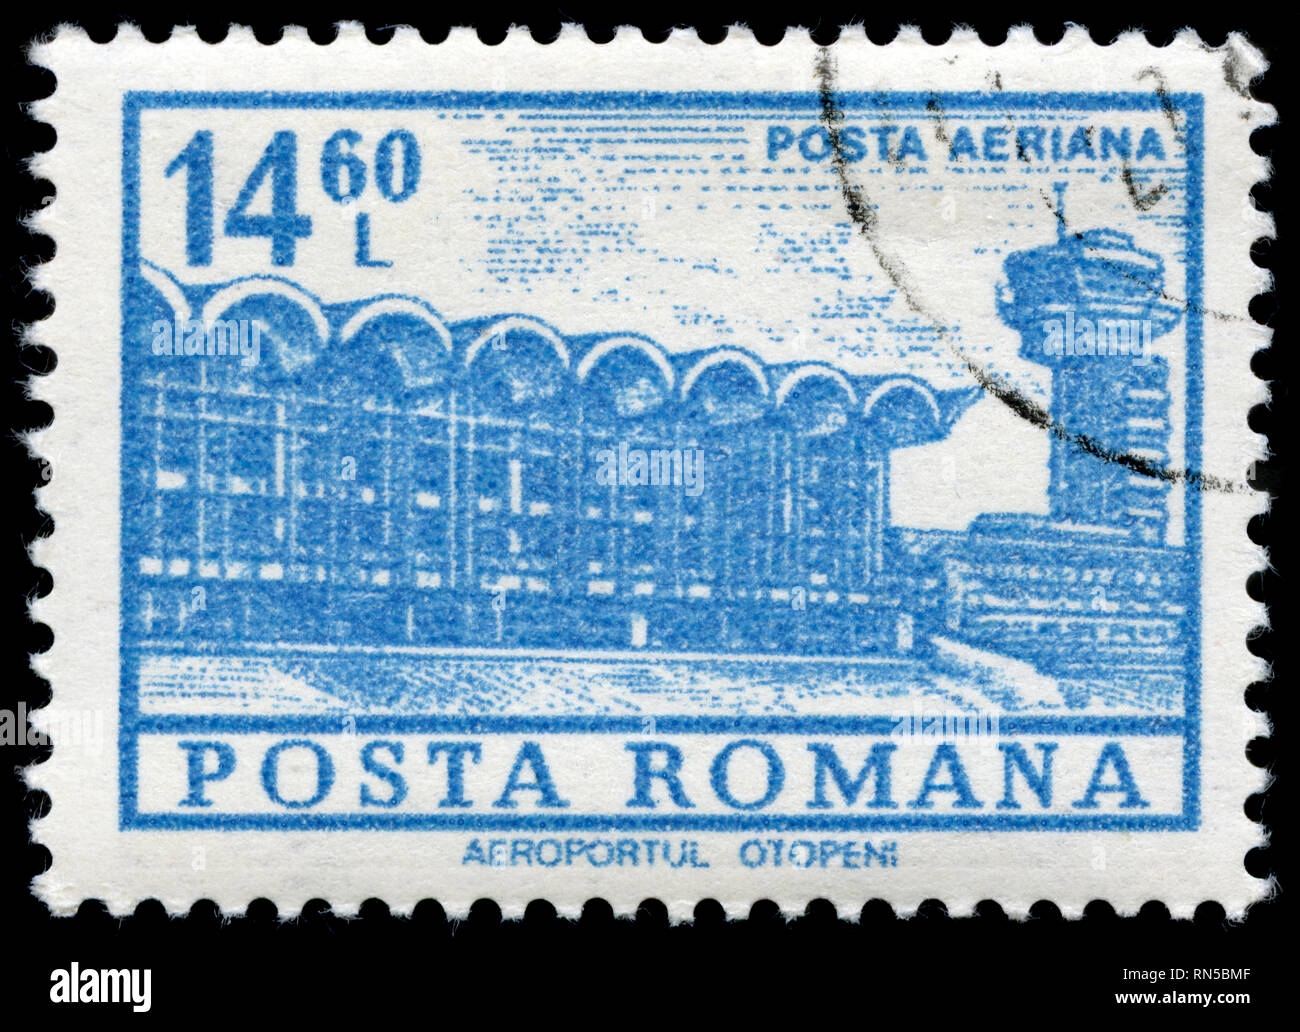 Postage stamp from Romania in the Definitives - Buildings series issued in 1972 Stock Photo